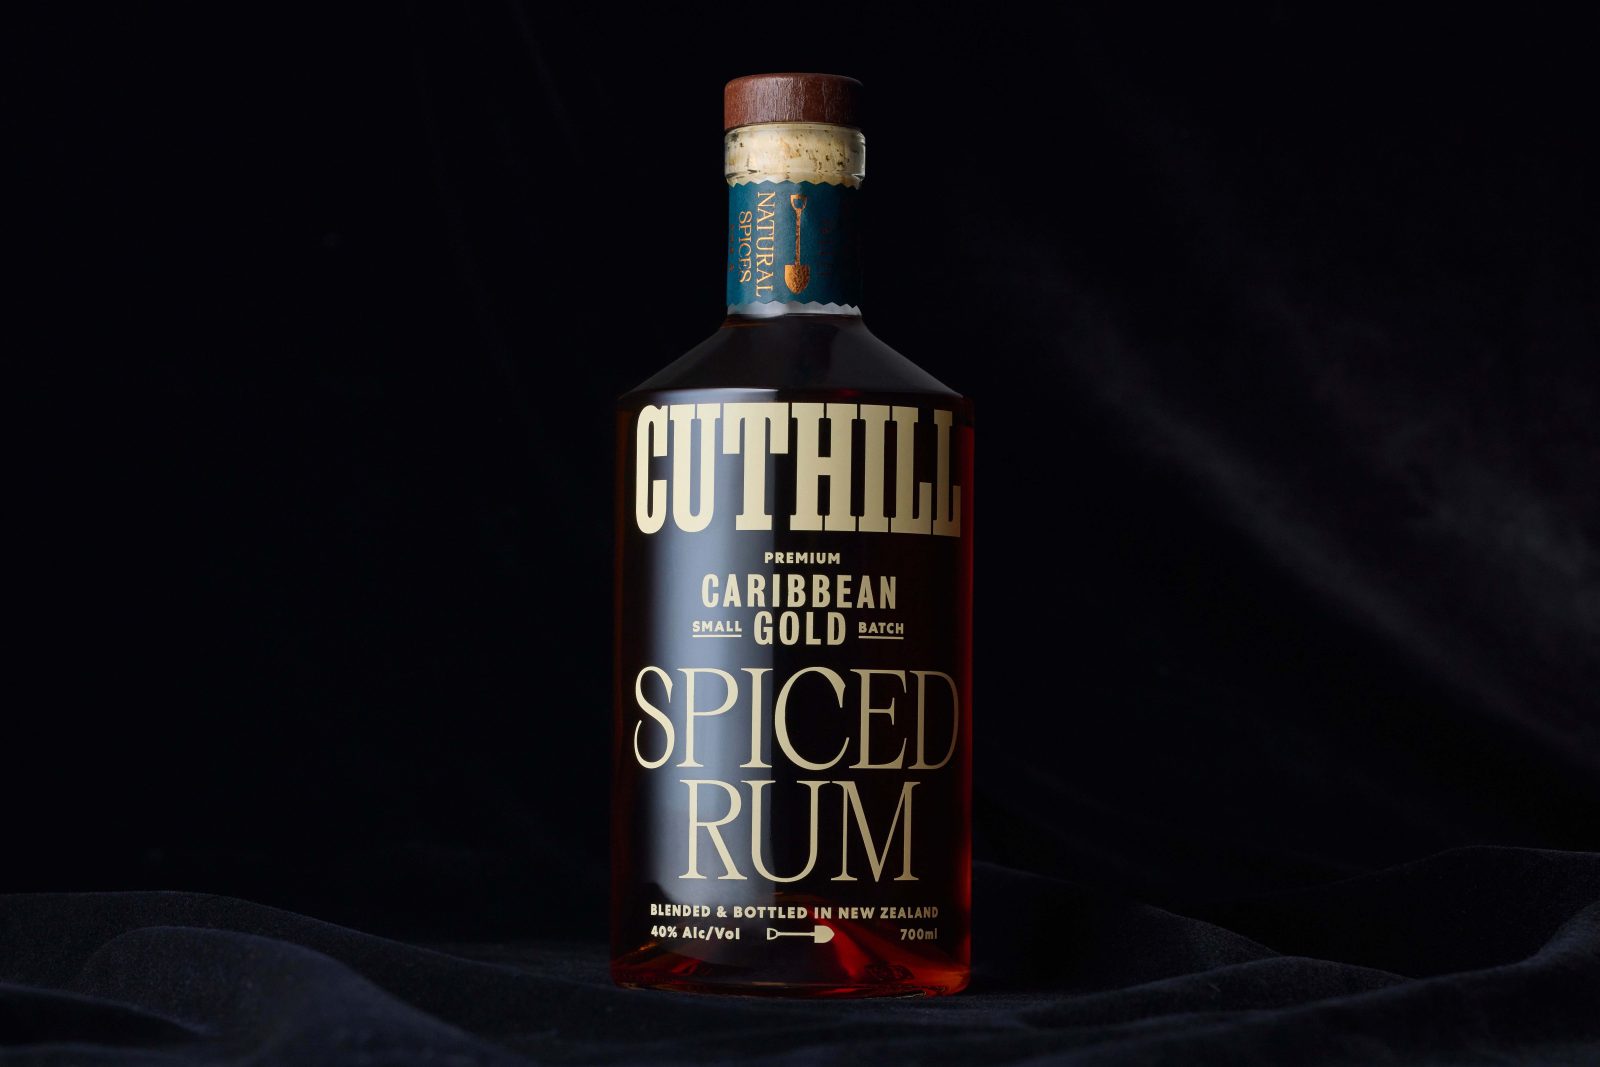 Cuthill Spiced Rum Packaging Design by MG Studio